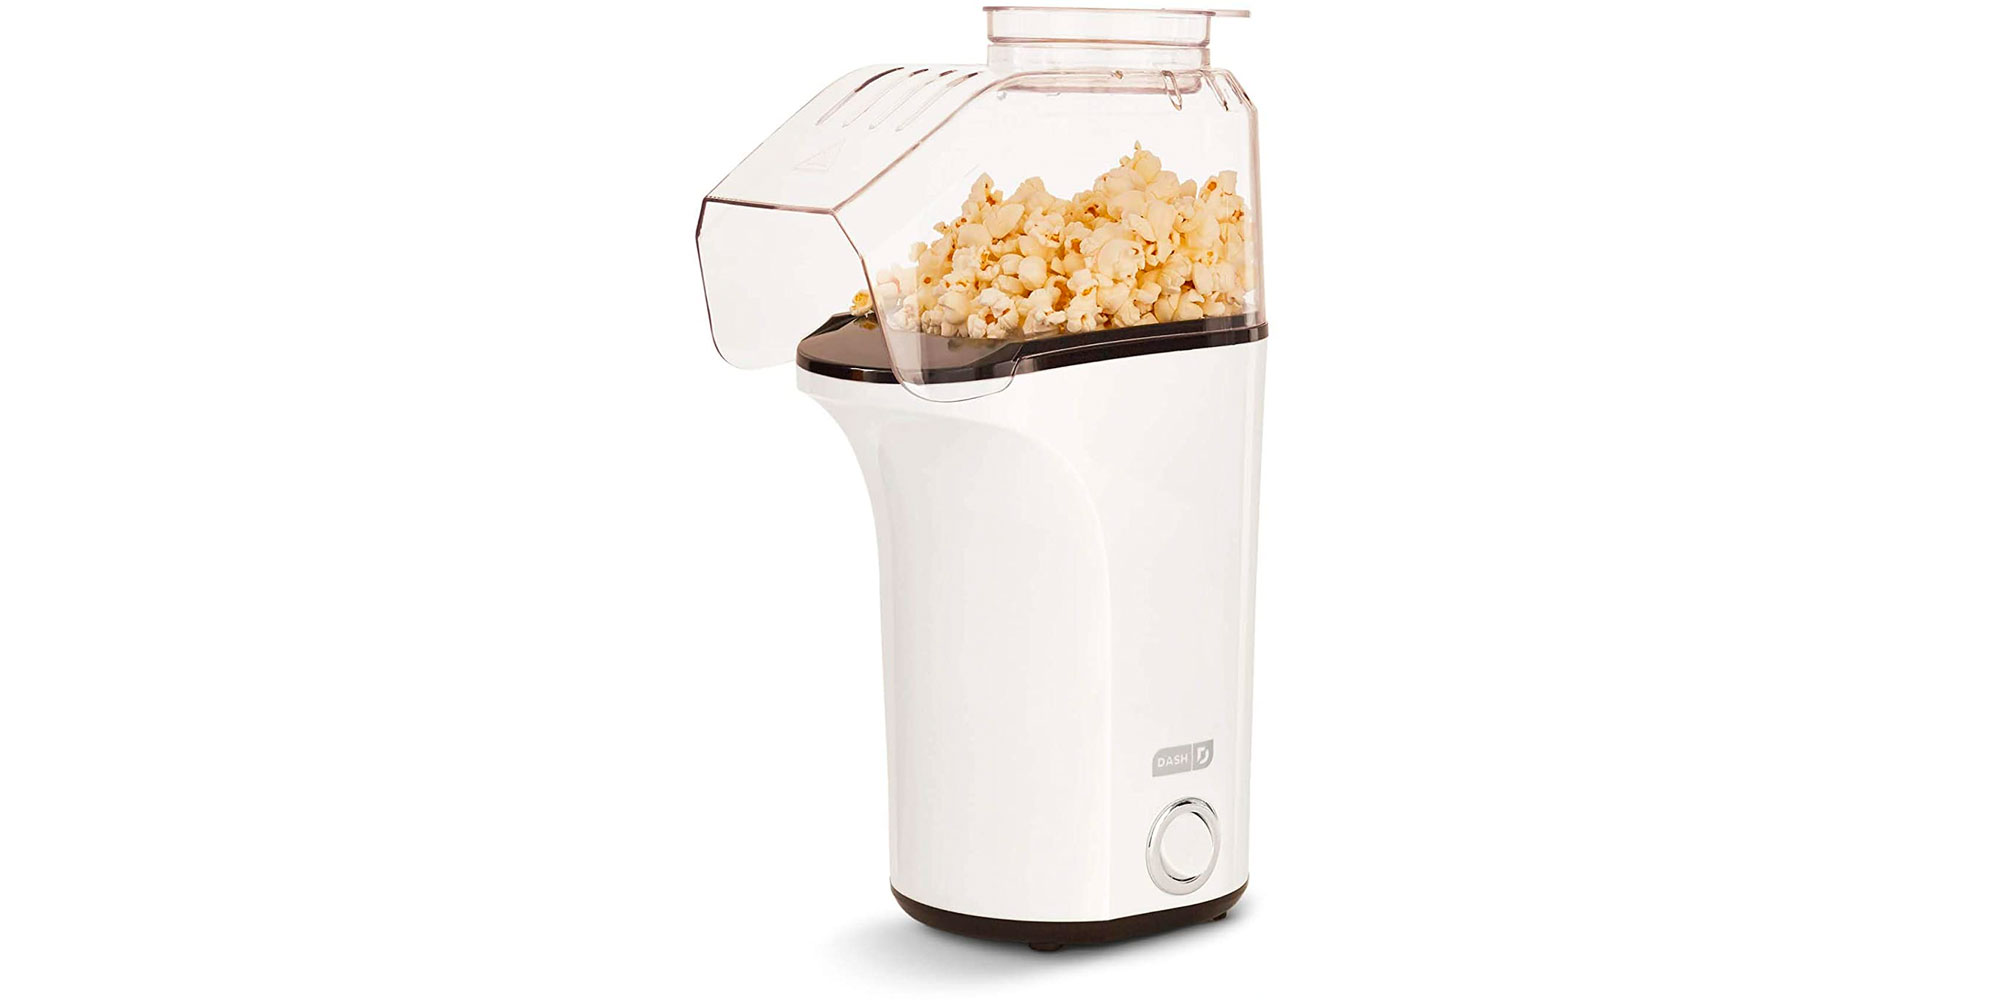 s #1 best-selling hot air popcorn popper hits a new low at $20